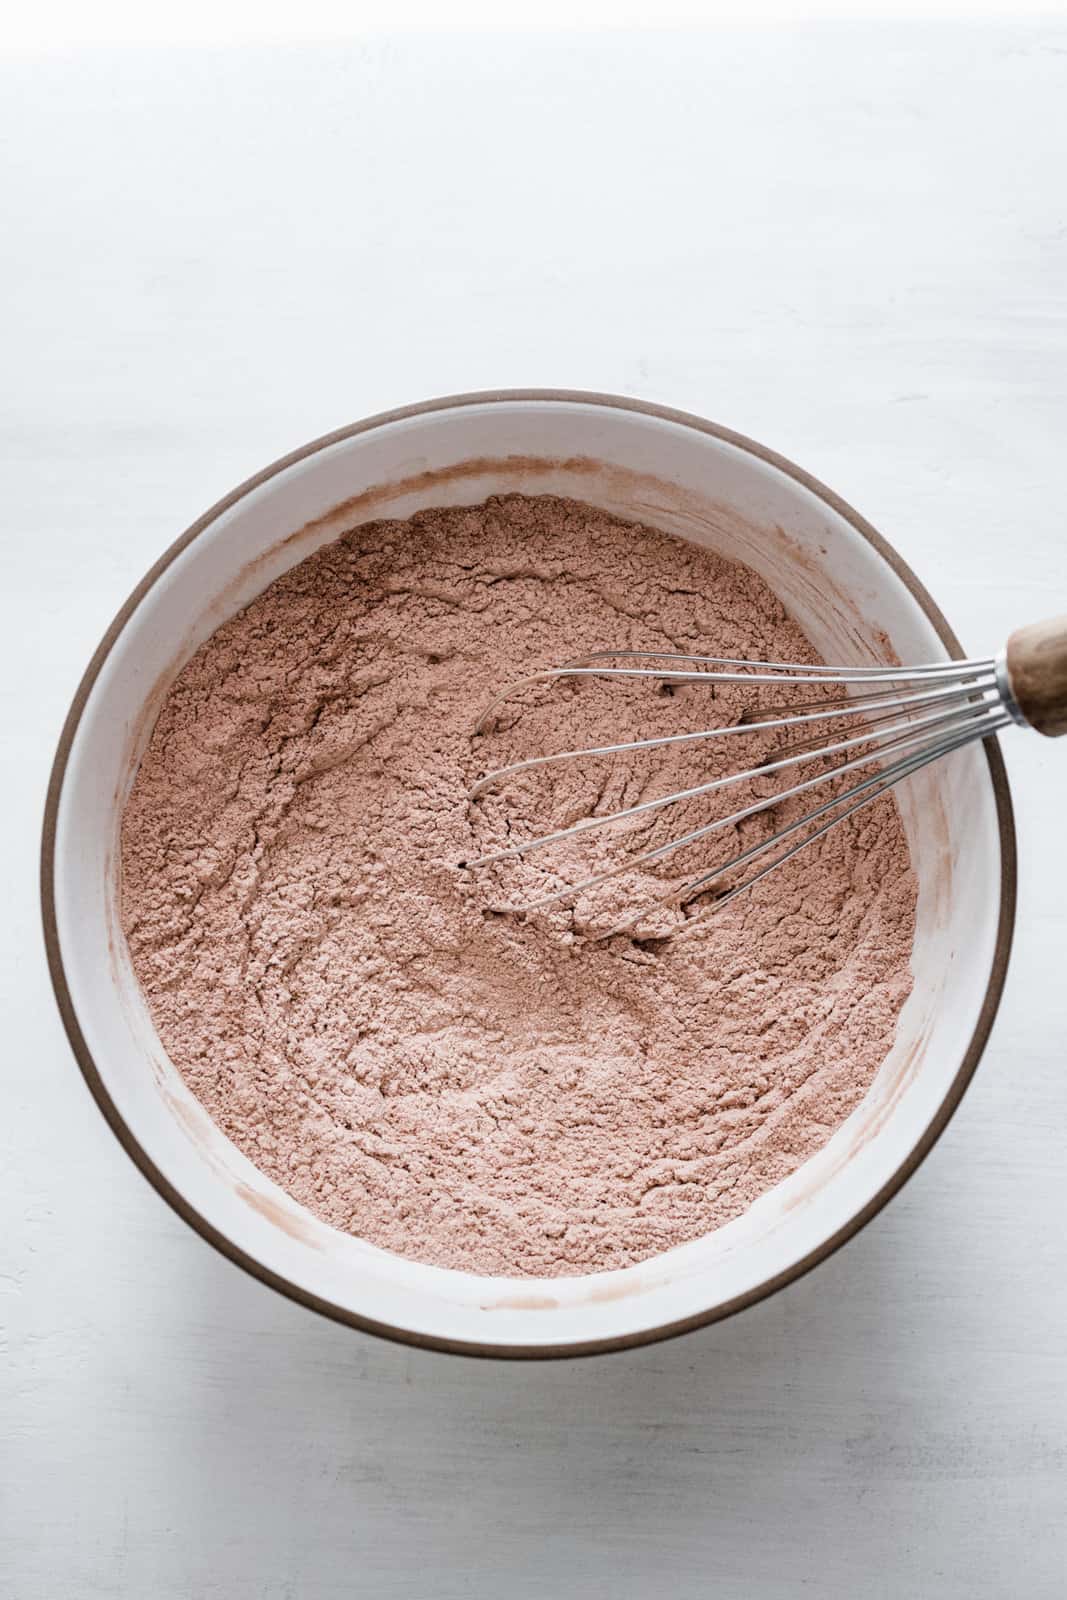 Flour, cocoa powder, baking powder and salt whisked together in bowl.